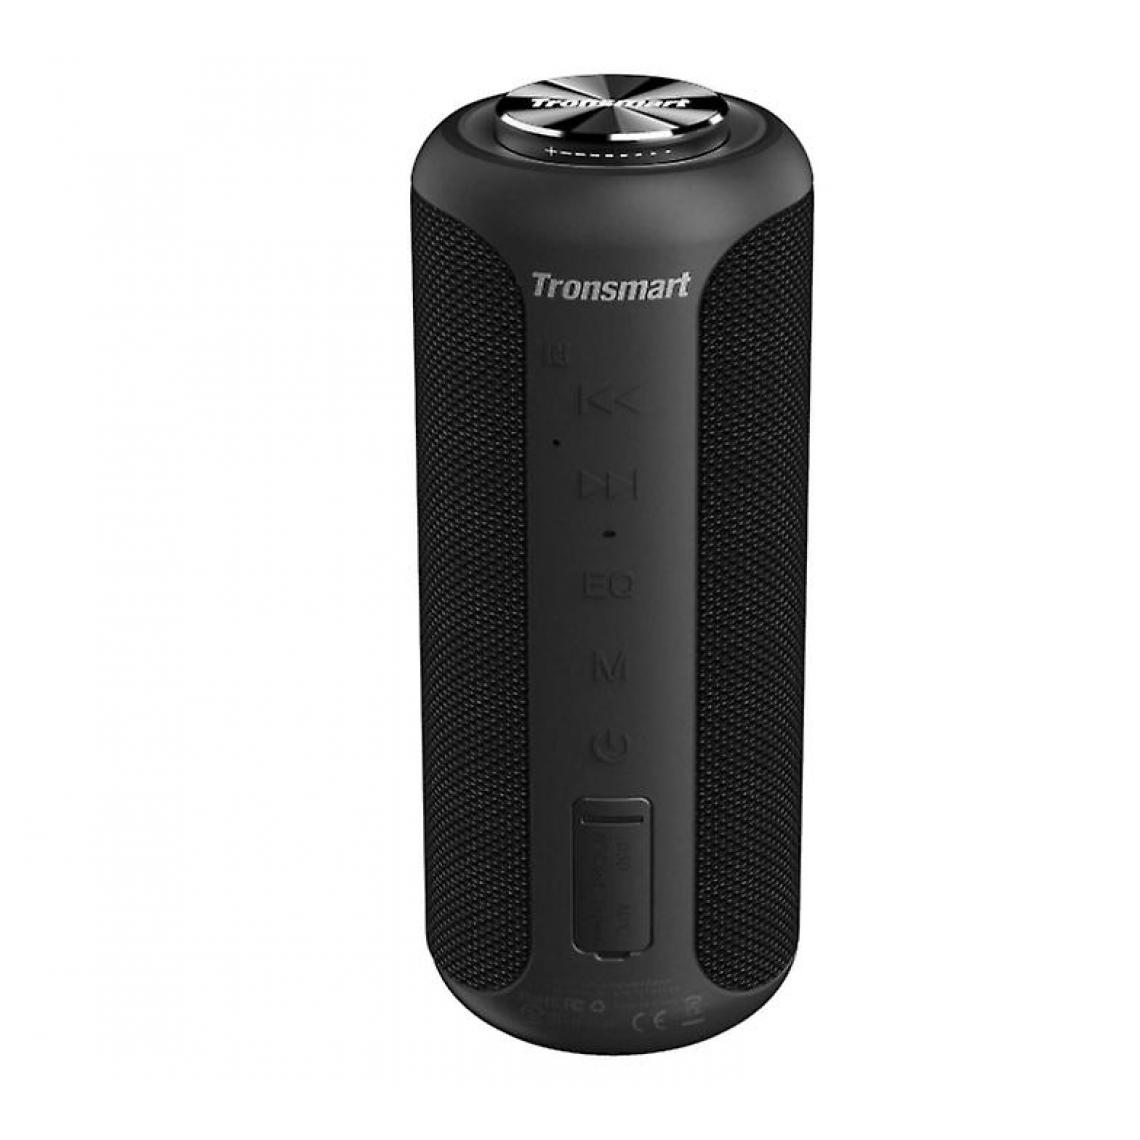 Universal - Tronsmart T6 Plus Upgraded Edition 40W Wireless Outdoor Bluetooth Speaker 5.0 with NFC connection, 360 ° surround sound, tri-bass effects, power bank, waterproof IPX6, voice assistant(Black) - Enceintes Hifi